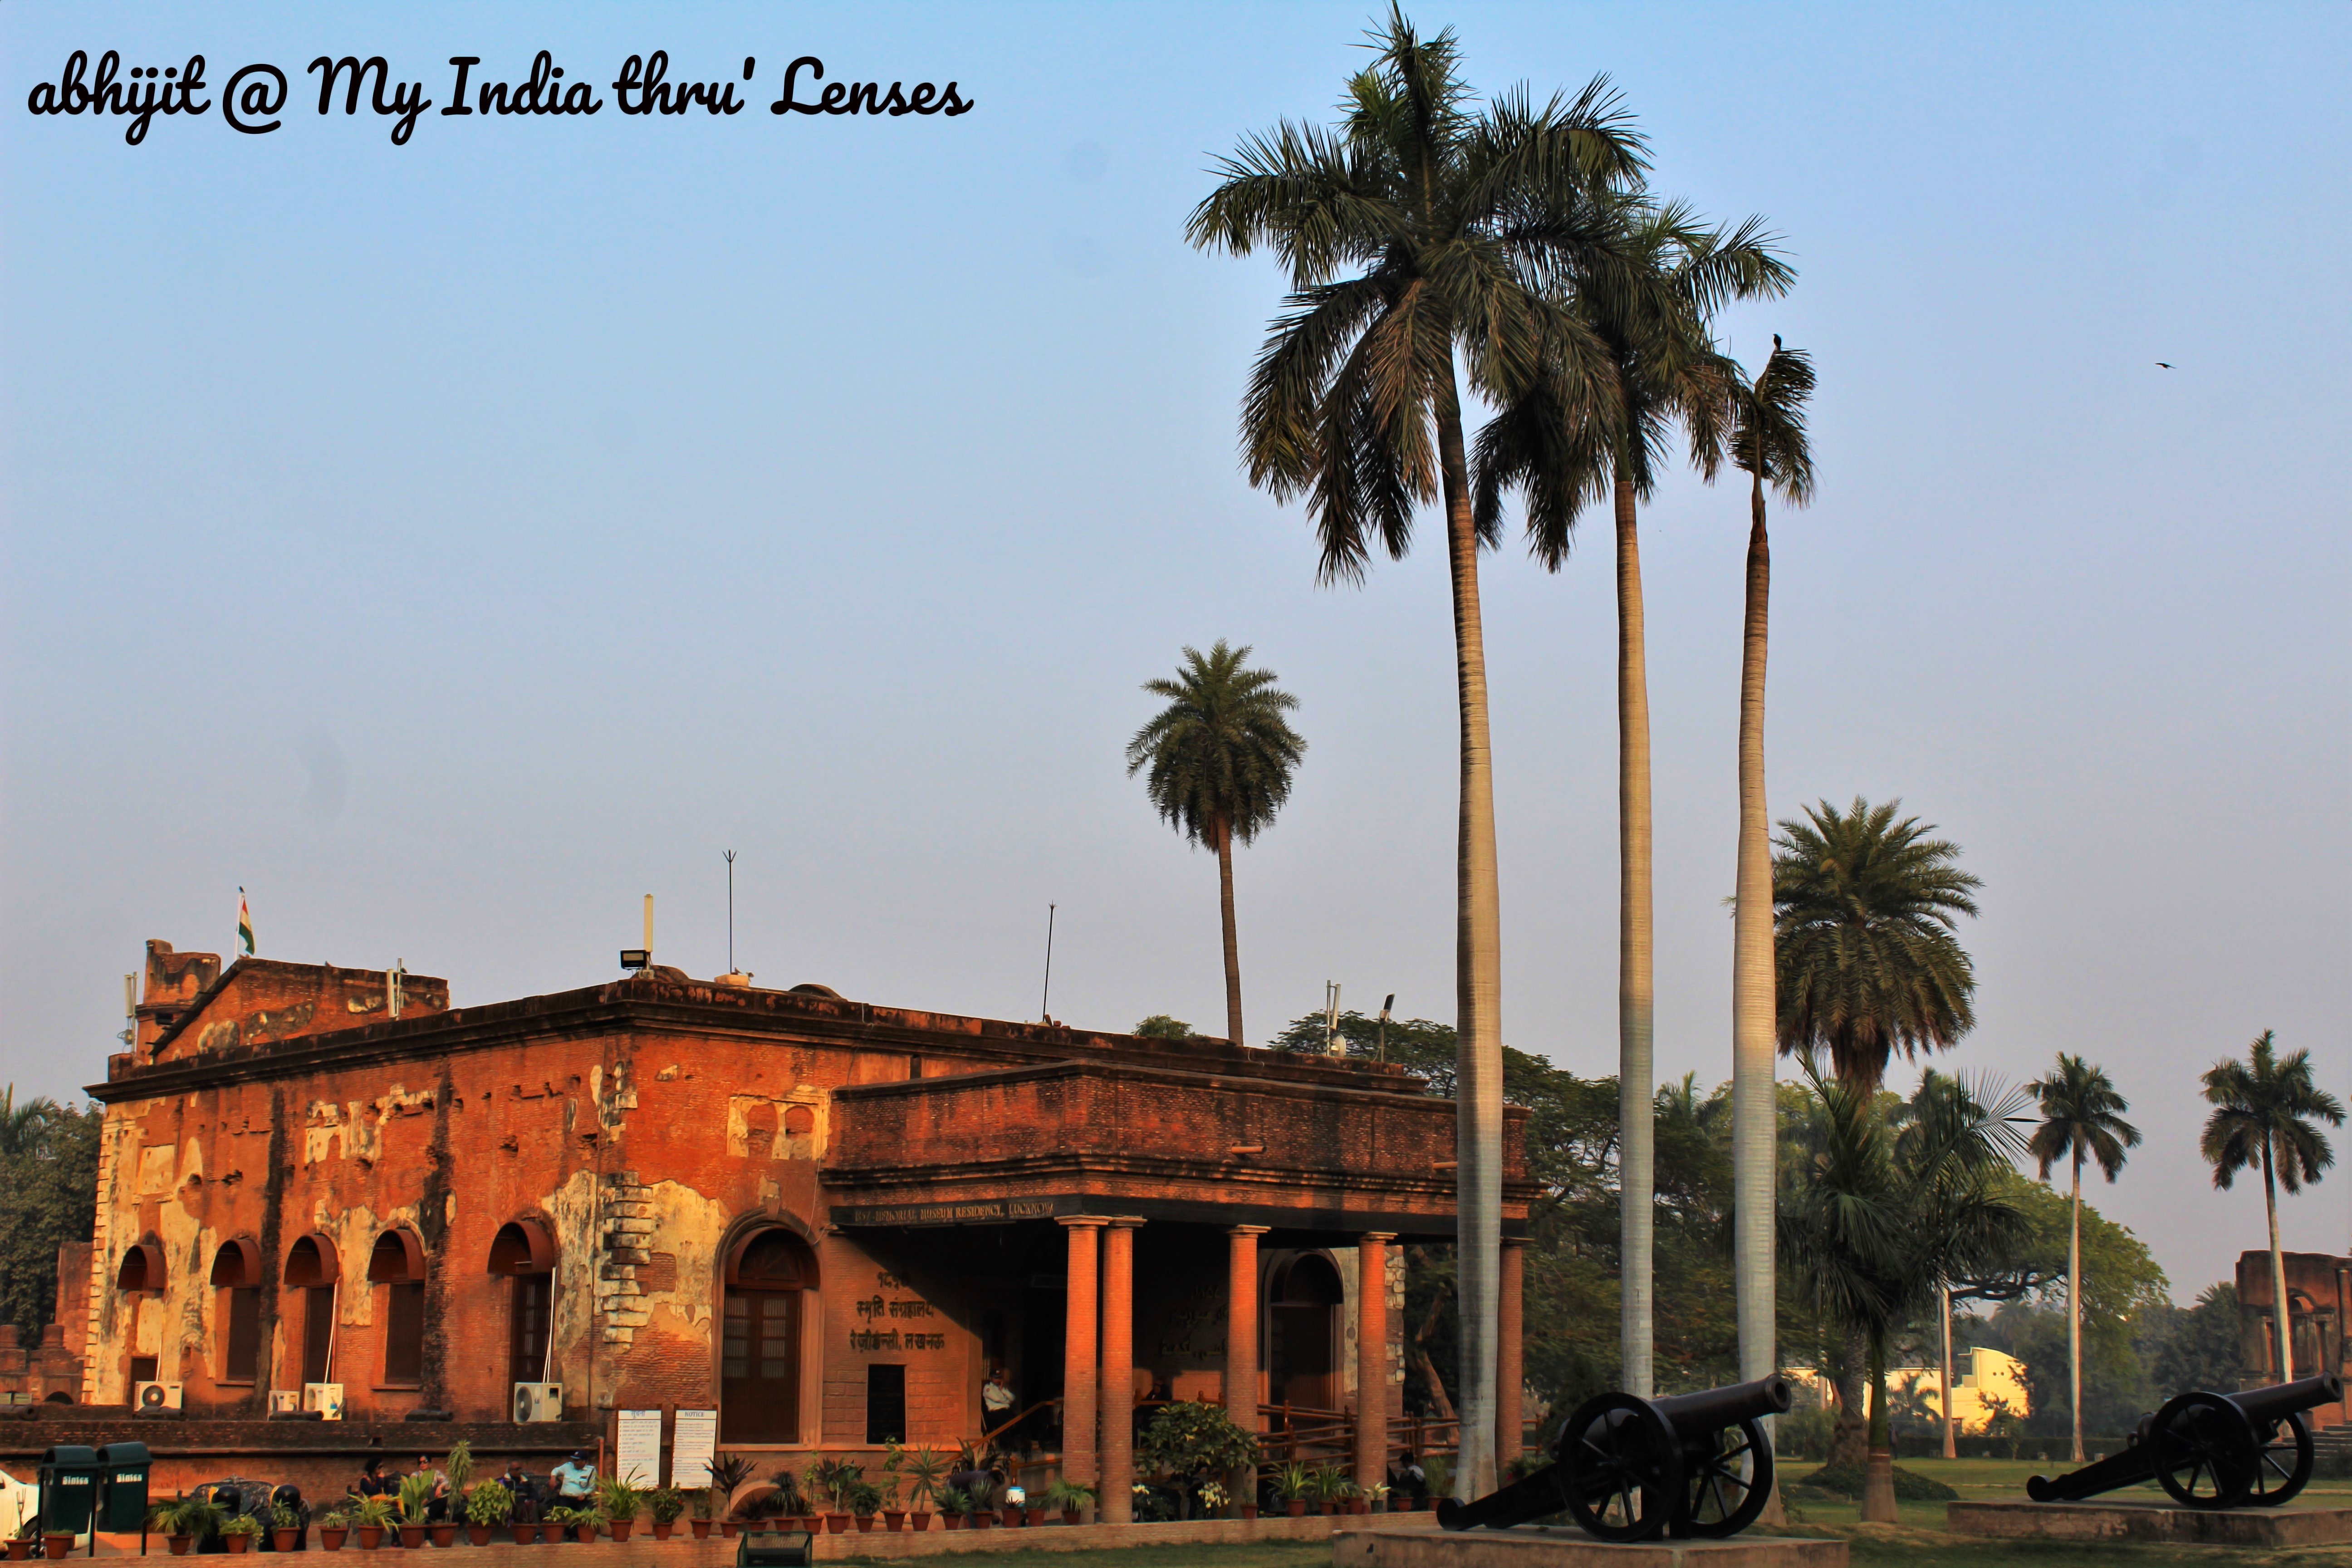 The British Residency at Lucknow